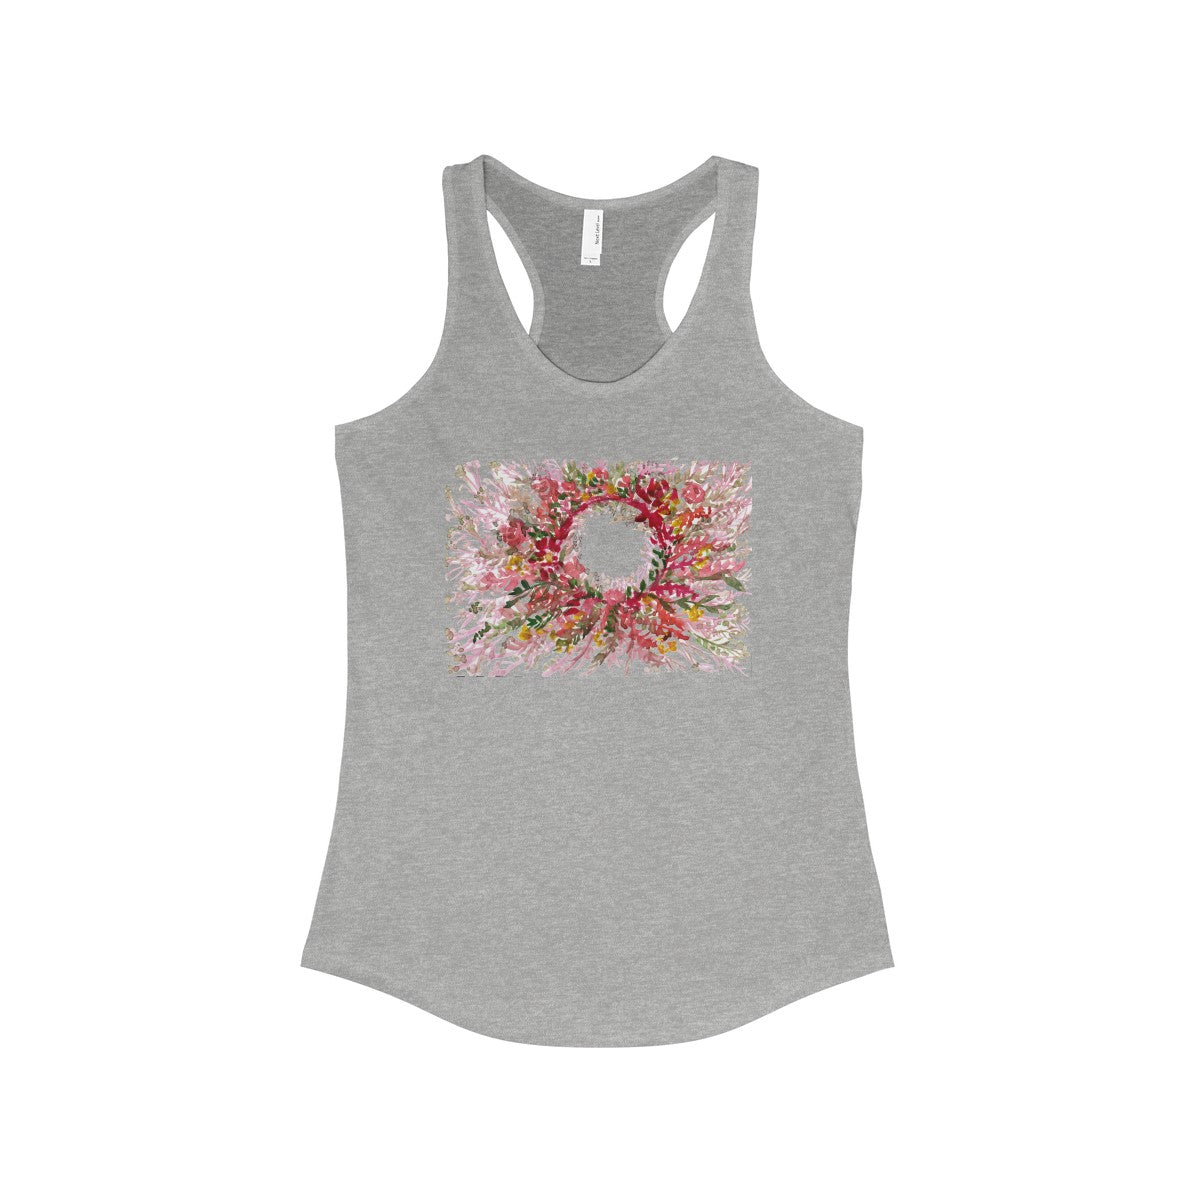 Red Floral Print Women's Racerback Tank Top, Fashionable Tanks- Made in the USA (US Size: XS-2XL)-Tank Top-90/10 Heather Gray-L-Heidi Kimura Art LLC Red Floral Print Tank, Red Orange Autumn Fall Inspired Floral Women's Ideal Racerback Tank - Made in the USA (US Size: XS-2XL)